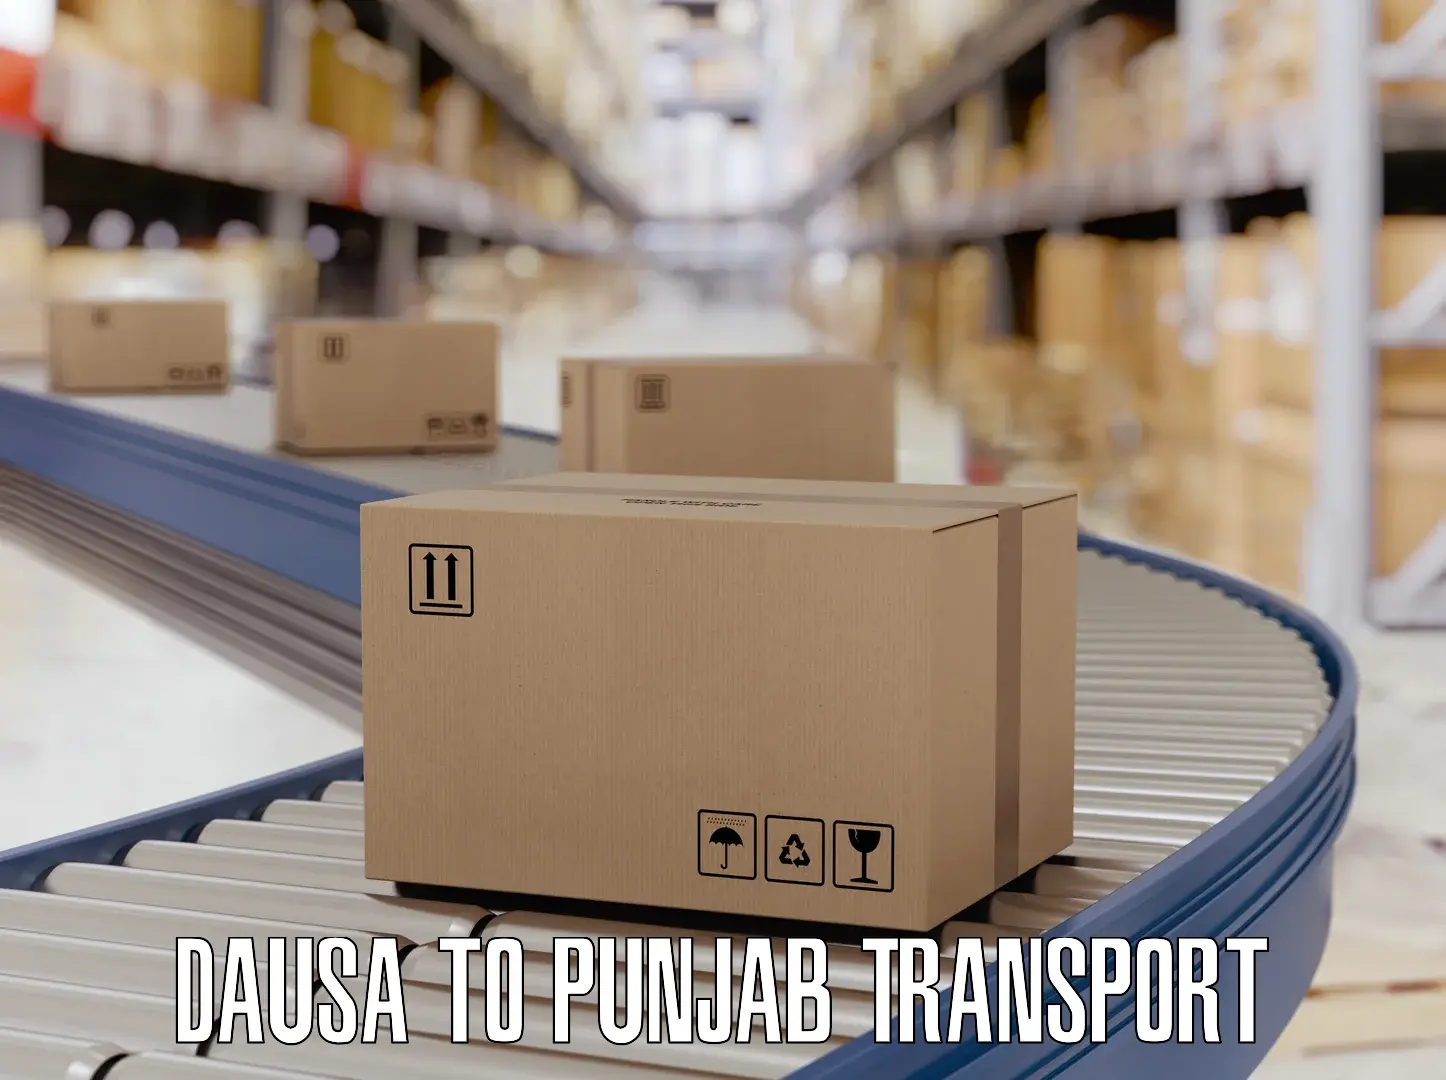 Commercial transport service Dausa to Ludhiana